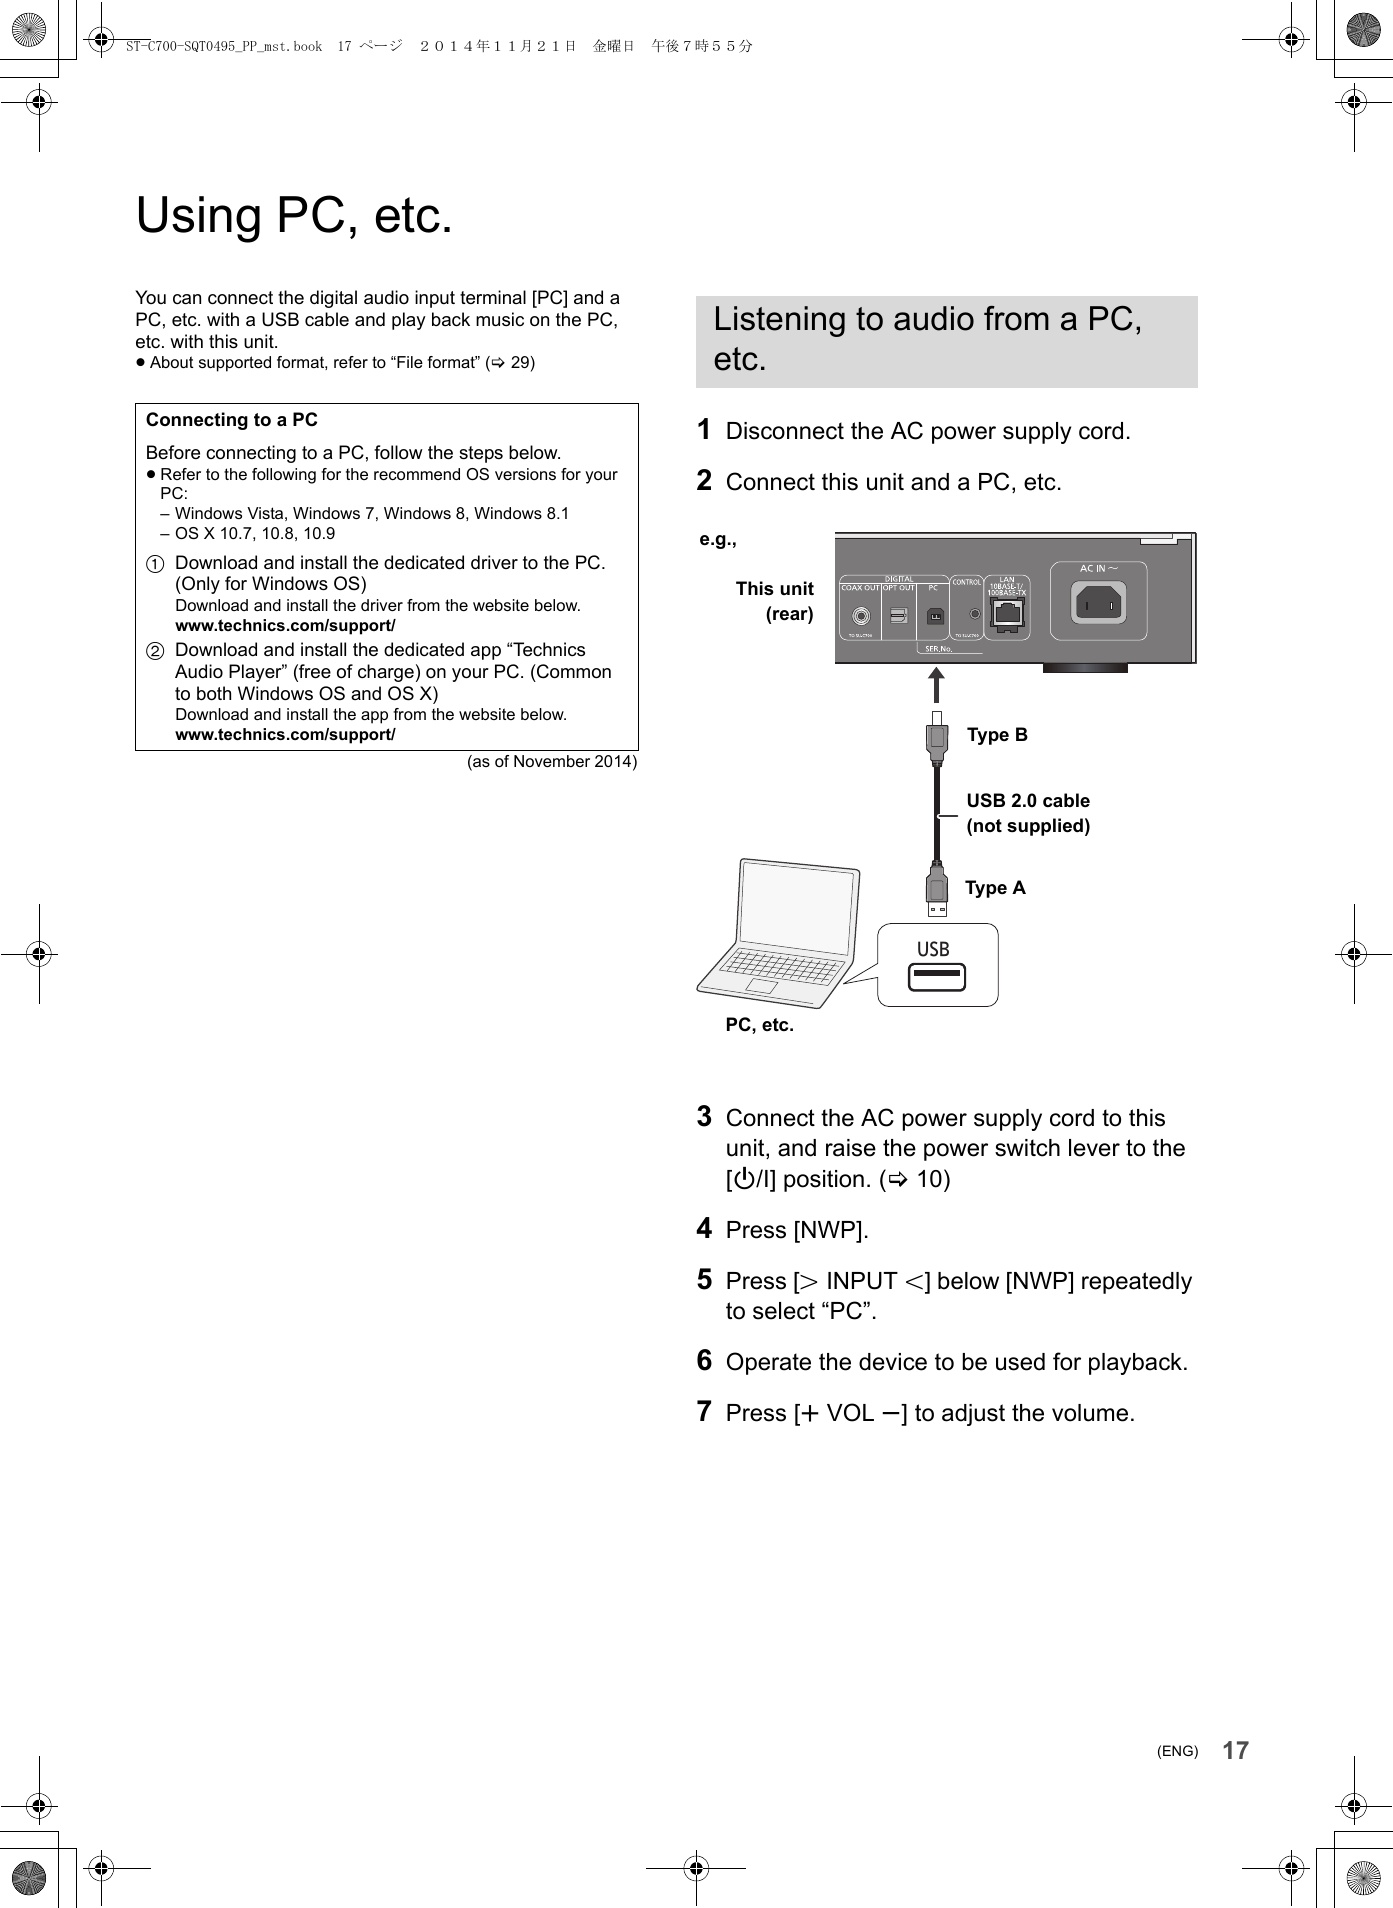 17(ENG)Using PC, etc.You can connect the digital audio input terminal [PC] and a PC, etc. with a USB cable and play back music on the PC, etc. with this unit.≥About supported format, refer to “File format” (&gt;29)(as of November 2014)1Disconnect the AC power supply cord.2Connect this unit and a PC, etc.3Connect the AC power supply cord to this unit, and raise the power switch lever to the [Í/I] position. (&gt;10)4Press [NWP].5Press [NINPUT O] below [NWP] repeatedly to select “PC”.6Operate the device to be used for playback.7Press [rVOL s] to adjust the volume.Connecting to a PCBefore connecting to a PC, follow the steps below.≥Refer to the following for the recommend OS versions for your PC:– Windows Vista, Windows 7, Windows 8, Windows 8.1– OS X 10.7, 10.8, 10.91Download and install the dedicated driver to the PC. (Only for Windows OS)Download and install the driver from the website below.www.technics.com/support/2Download and install the dedicated app “Technics Audio Player” (free of charge) on your PC. (Common to both Windows OS and OS X)Download and install the app from the website below.www.technics.com/support/Listening to audio from a PC, etc.USBUSB 2.0 cable(not supplied)This unit(rear)e.g.,PC, etc.Type AType BST-C700-SQT0495_PP_mst.book  17 ページ  ２０１４年１１月２１日　金曜日　午後７時５５分